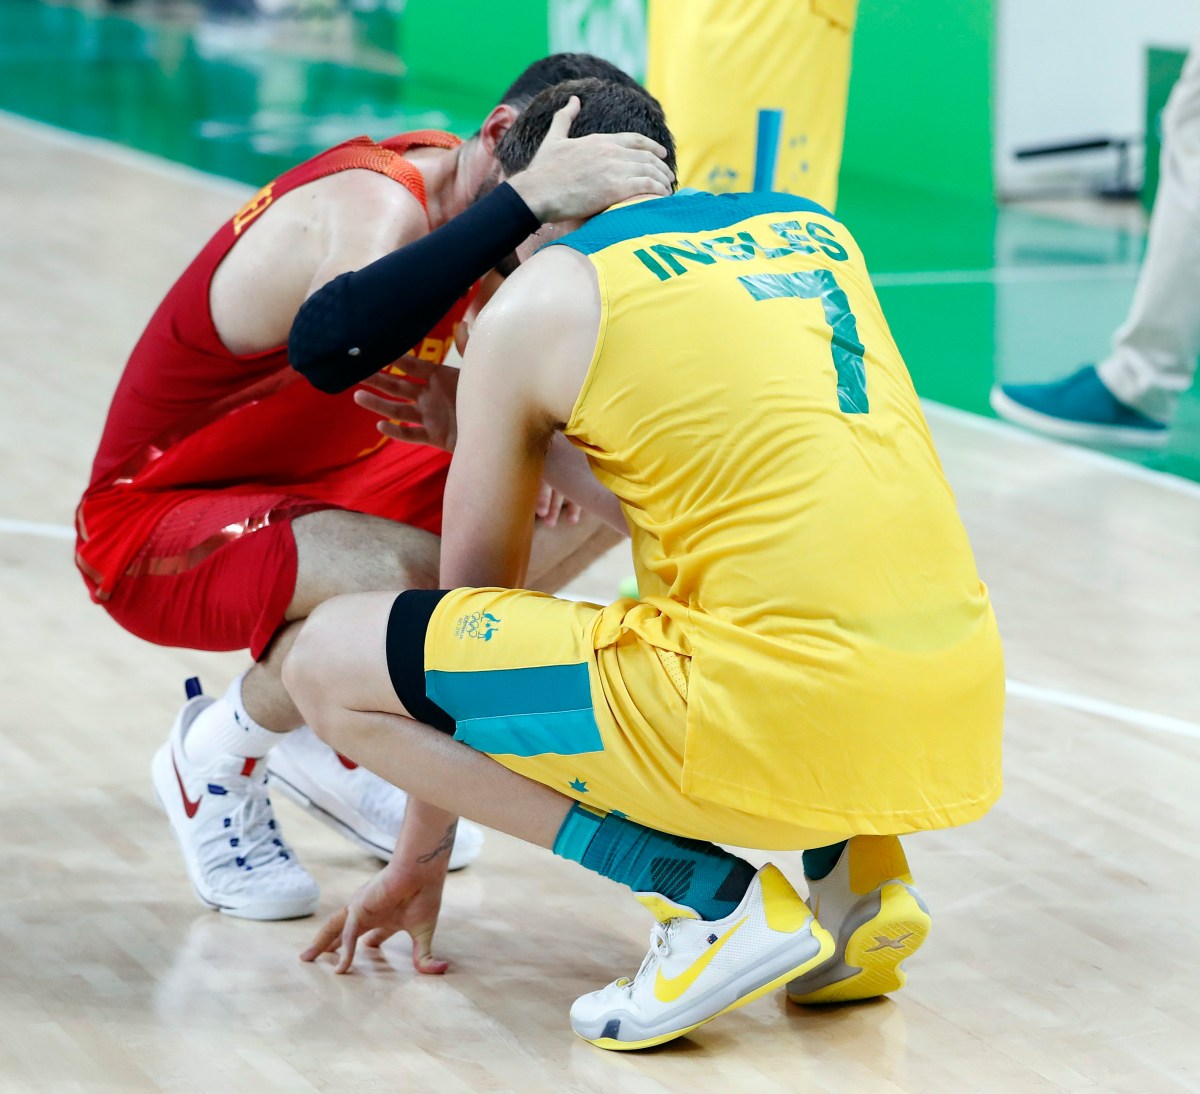 epa05505072 Spain's Rudy Fernandez (L) and Australia's Joe Ingles (R) after Spain defeated Australia during their Rio 2016 Olympic Games Men's Basketball Bronze Medal Match at the Carioca Arena 1 in the Olympic Park in Rio de Janeiro, Brazil, 21 August 2016.  EPA/JORGE ZAPATA